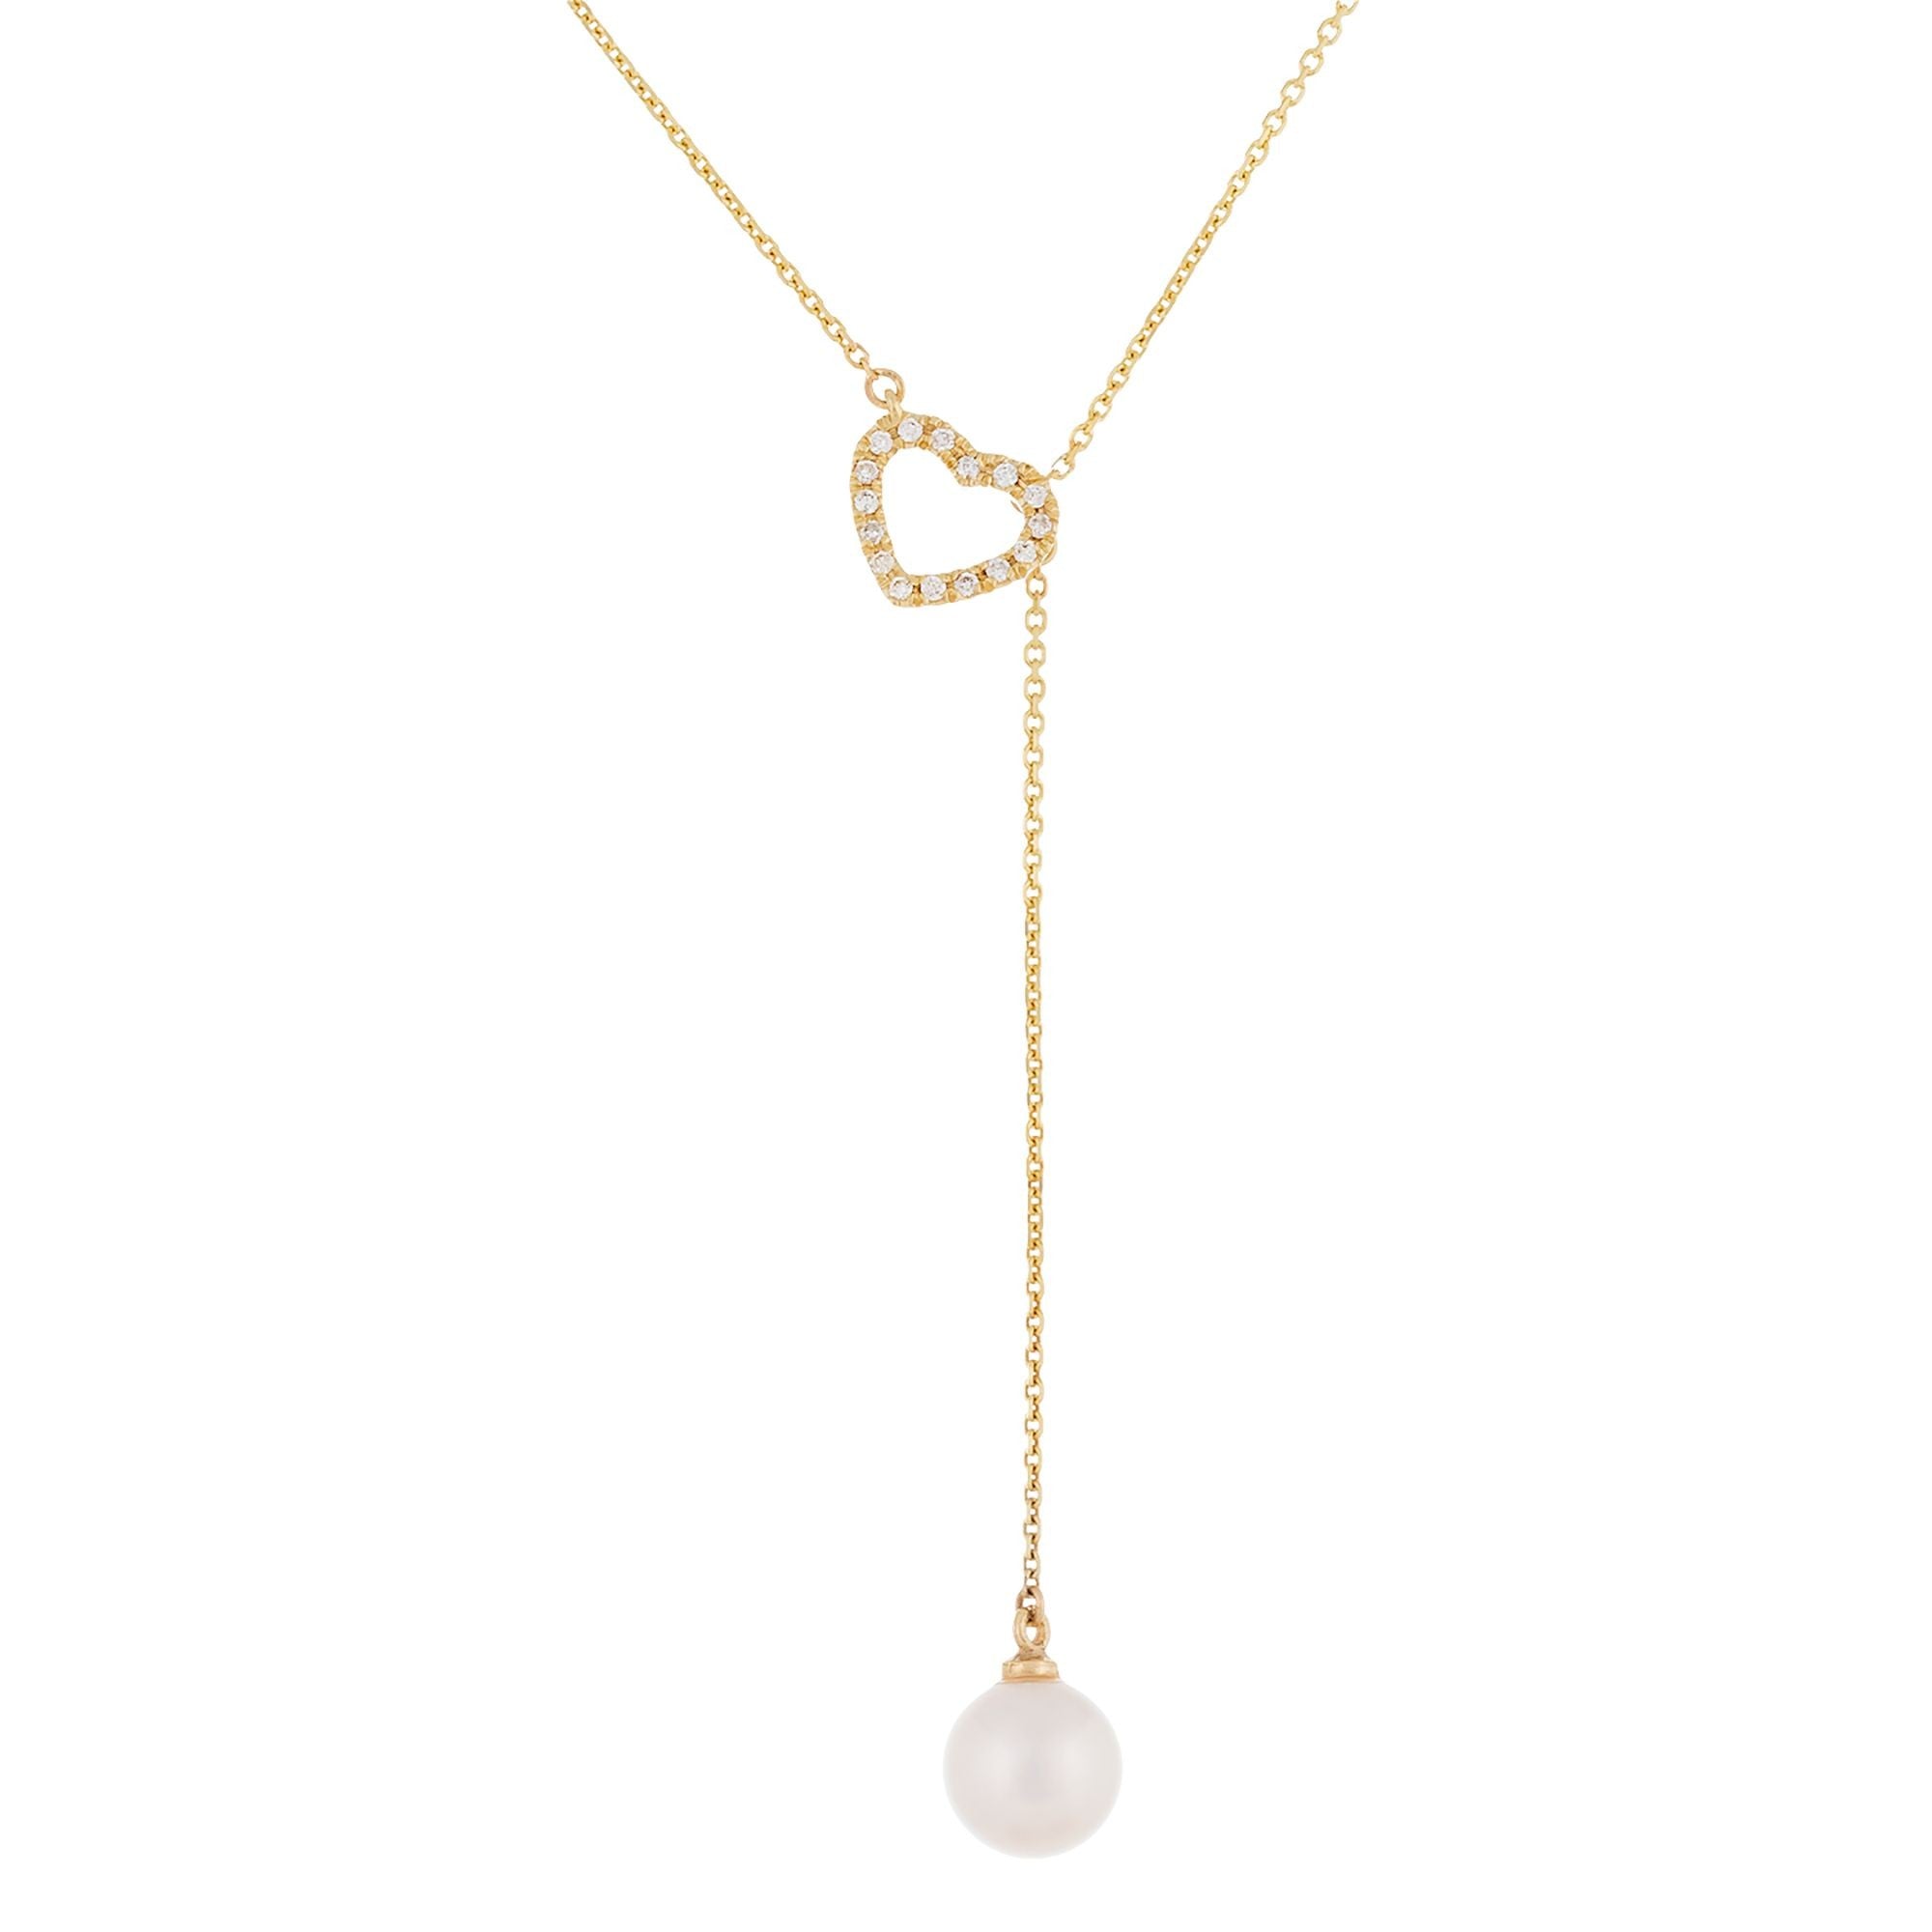 title:Splendid Pearls 14K Yellow Gold Pearl Pendant HE-228YG;color:White